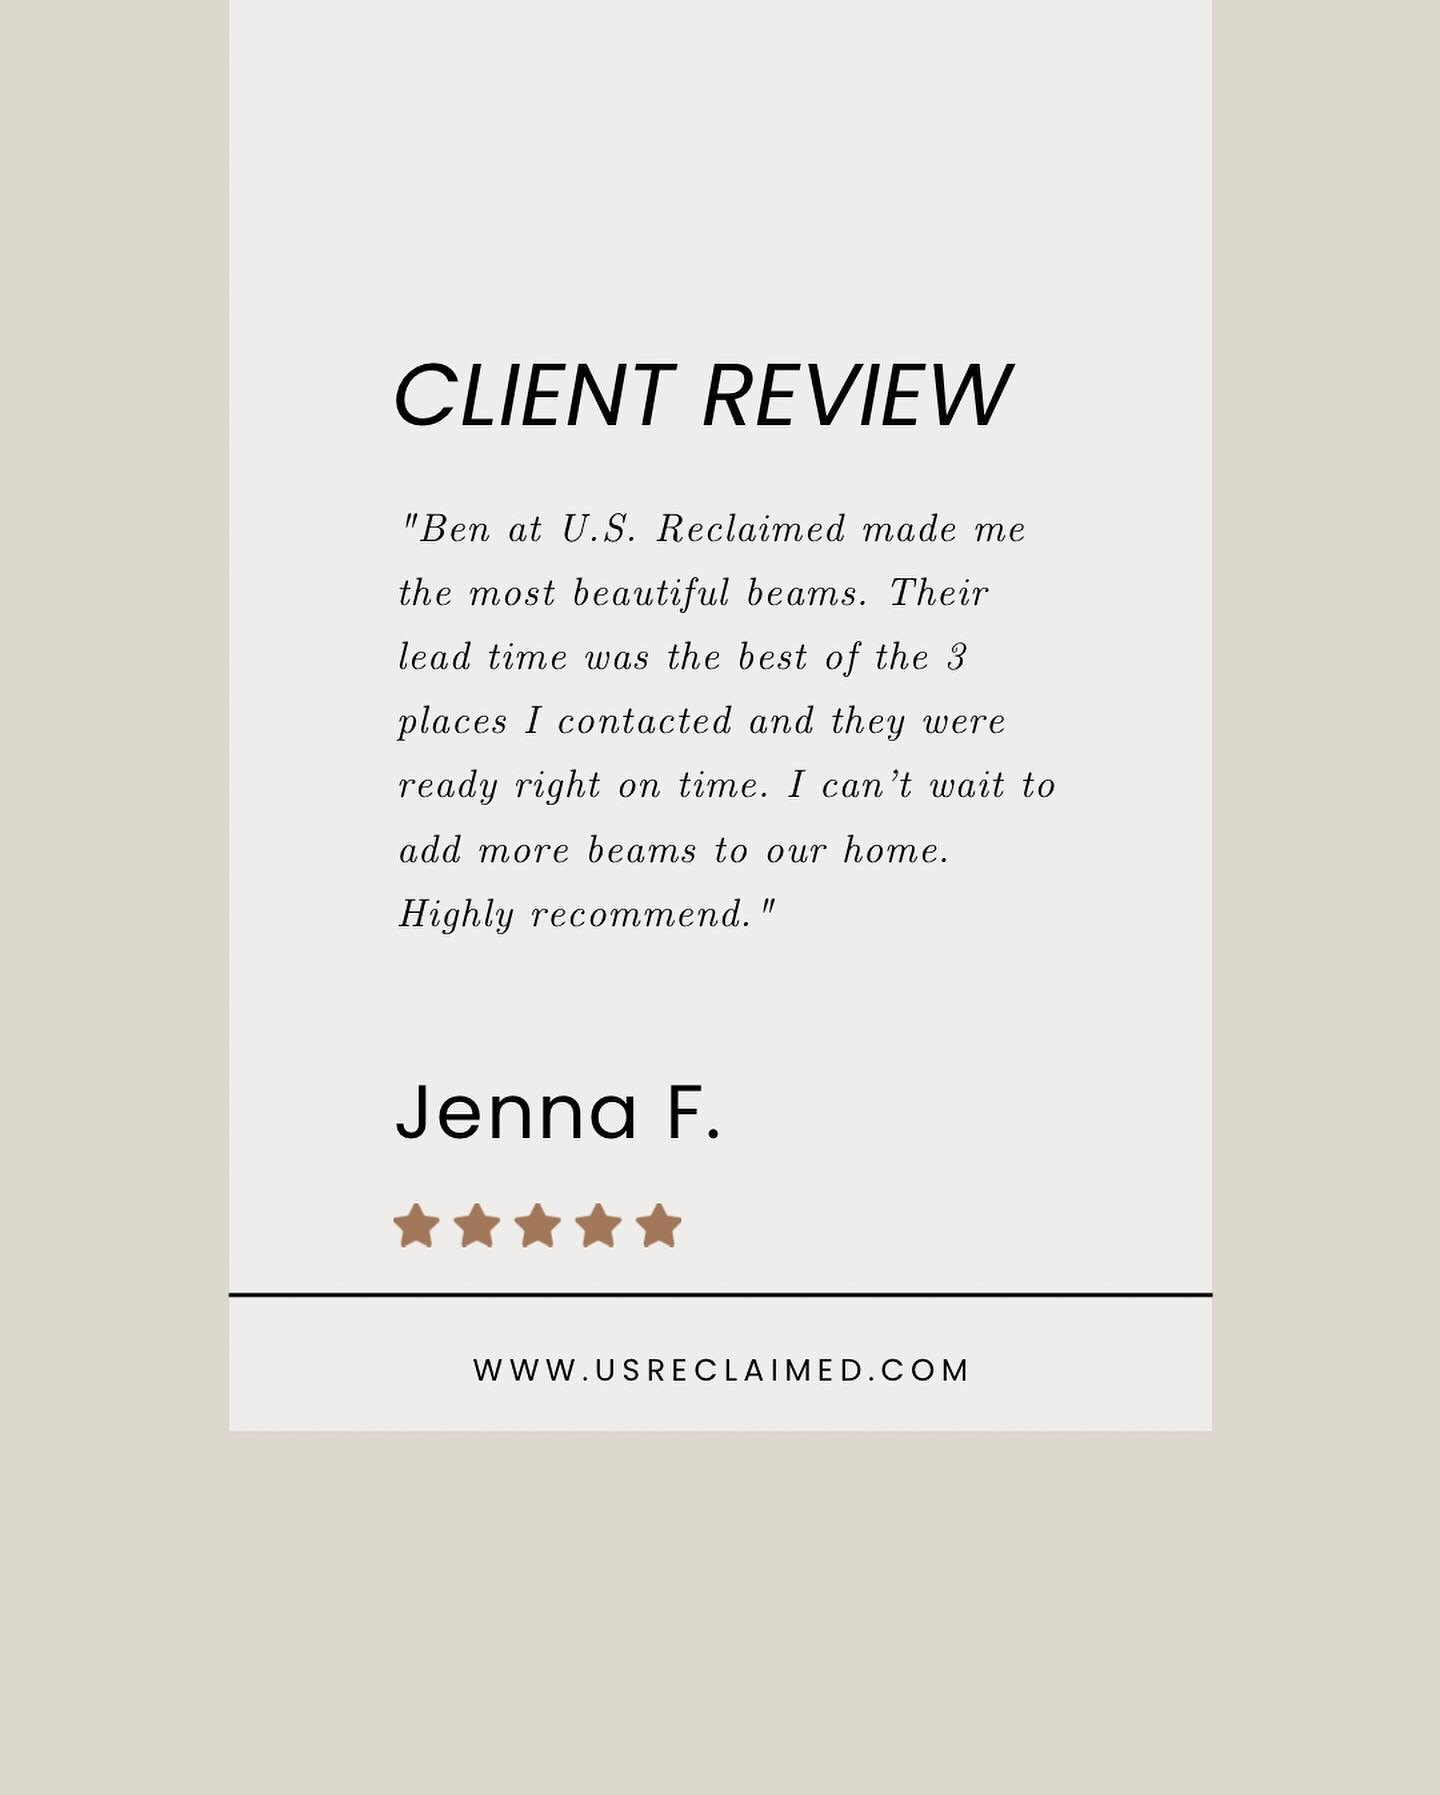 Check out this stellar review by our customer Jenna F. and swipe left to see the stunning results of her 20&rsquo; ceiling beams. 🏠 

We take pride in turning visions into reality. Thank you, Jenna, for sharing your experience! 🌟
&bull;
&bull;
&bul